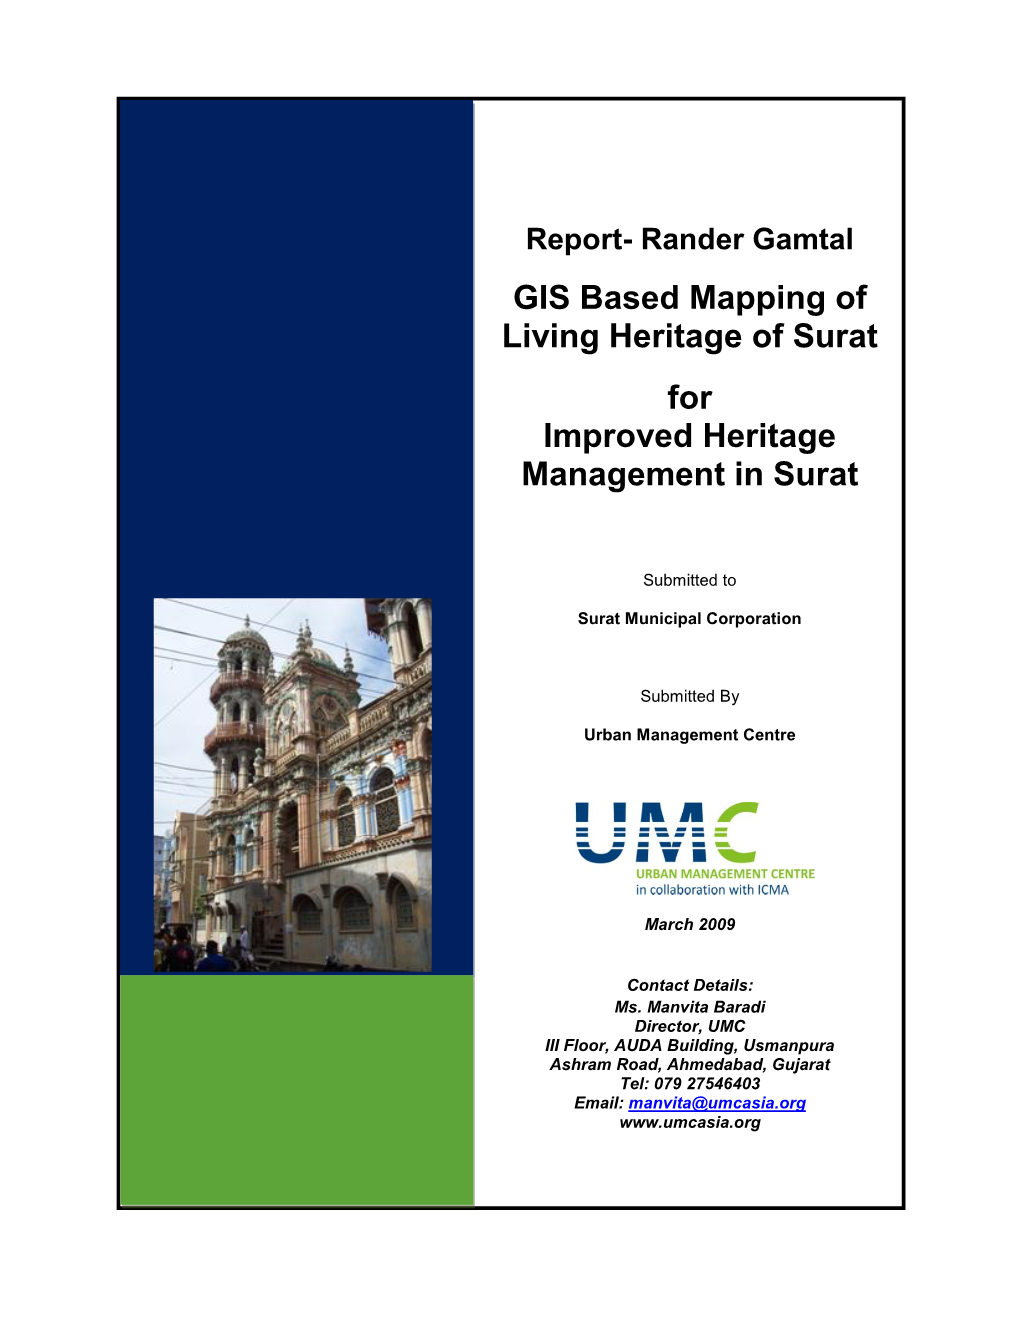 GIS Based Mapping of Living Heritage of Surat for Improved Heritage